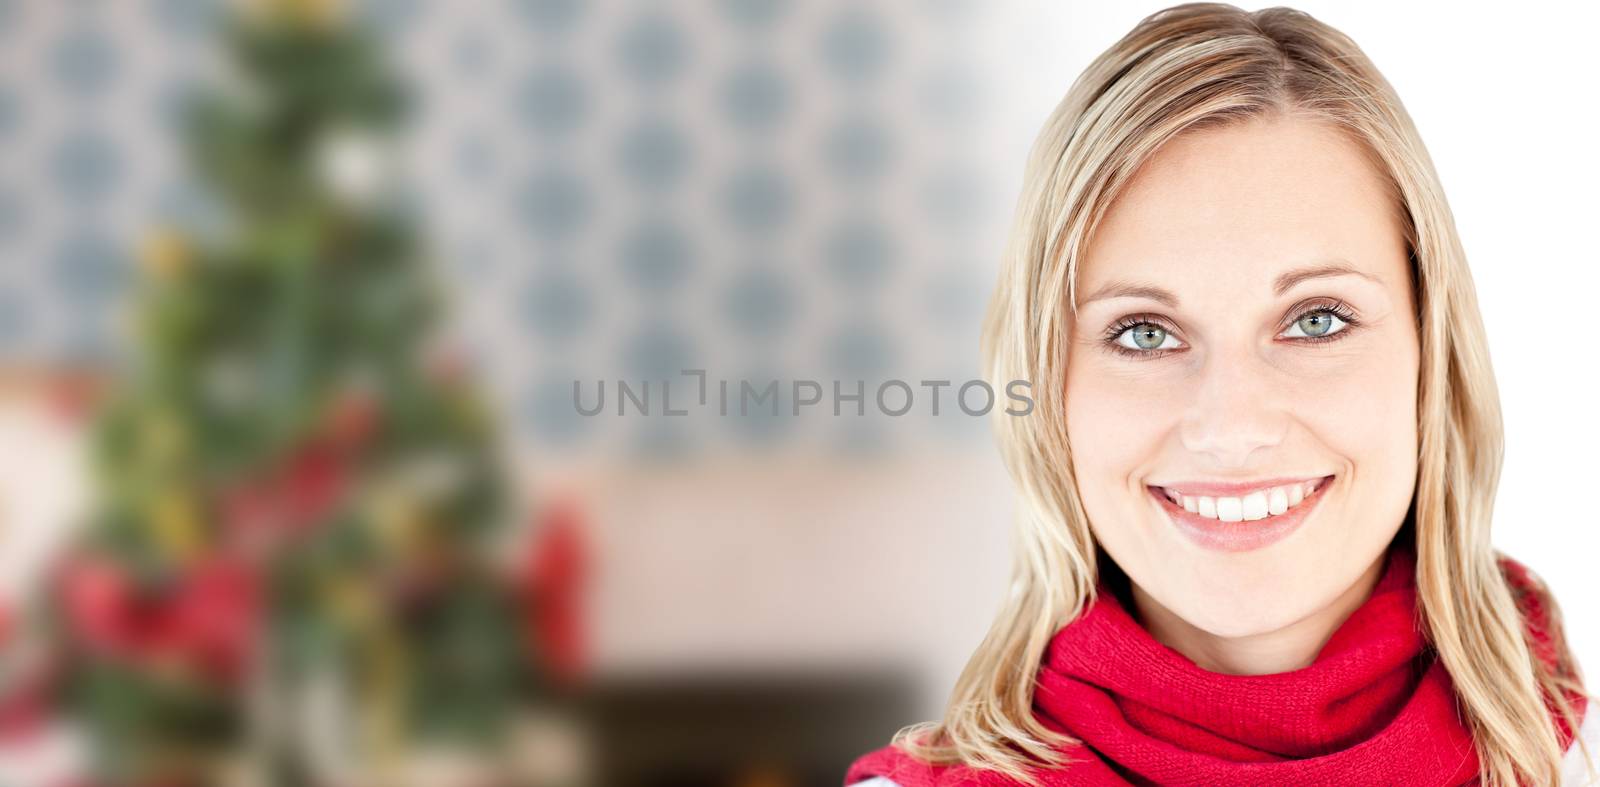 Portrait of a beautiful woman with a red scarf smiling at the camera against home at christmas time